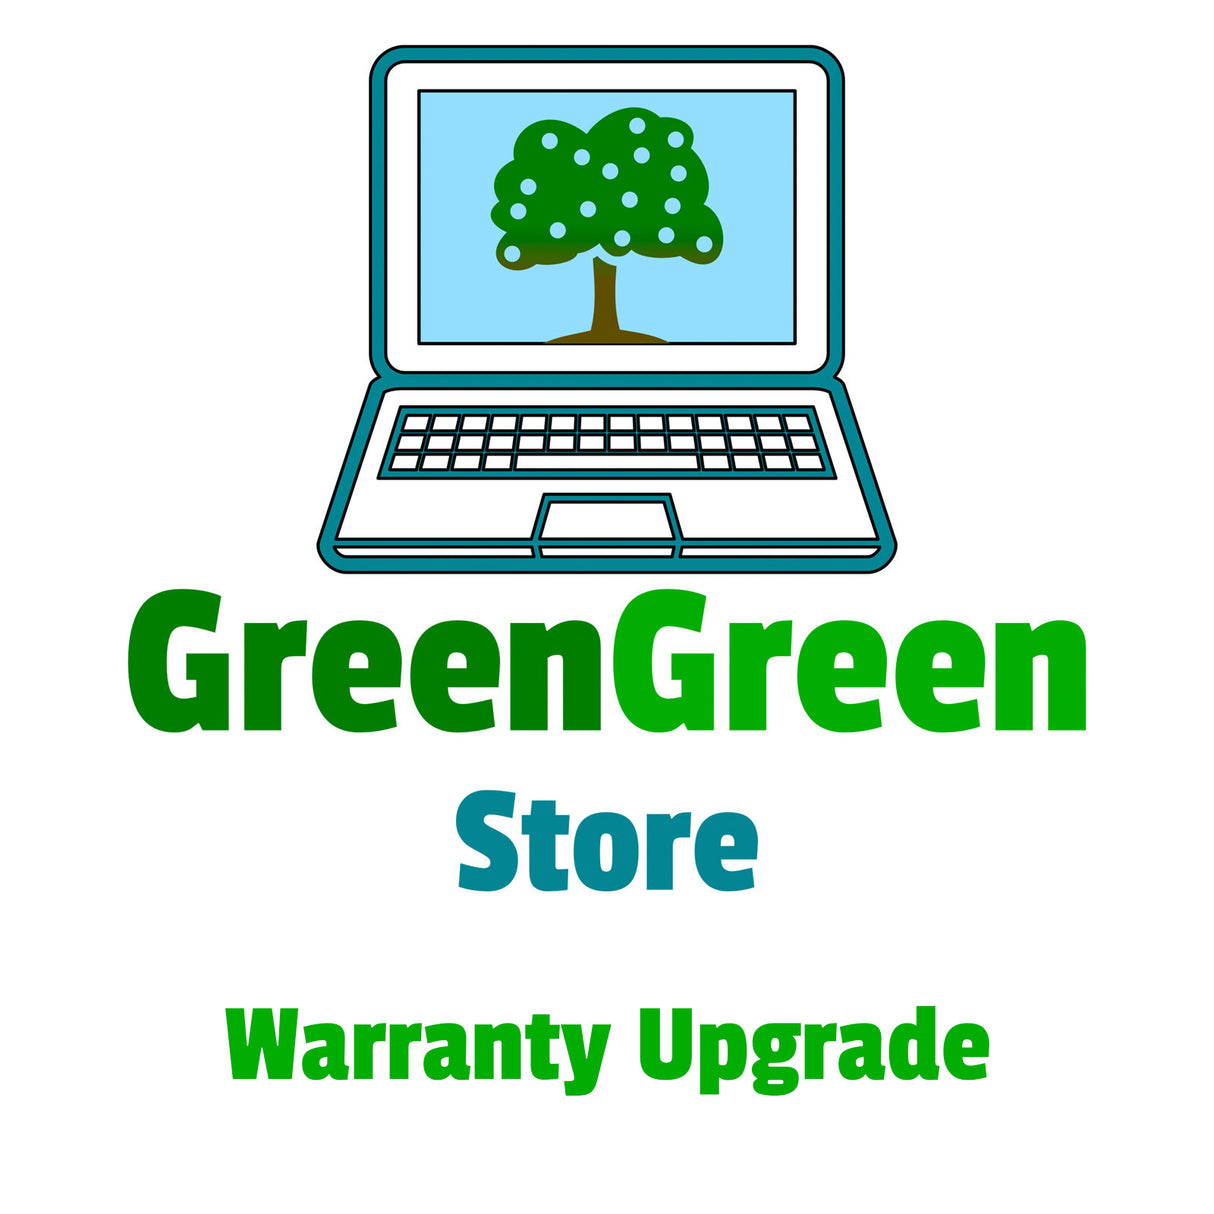 Warranty Upgrade (for upto 12 month) - Post Device Purchase Add-on - GreenGreen Store